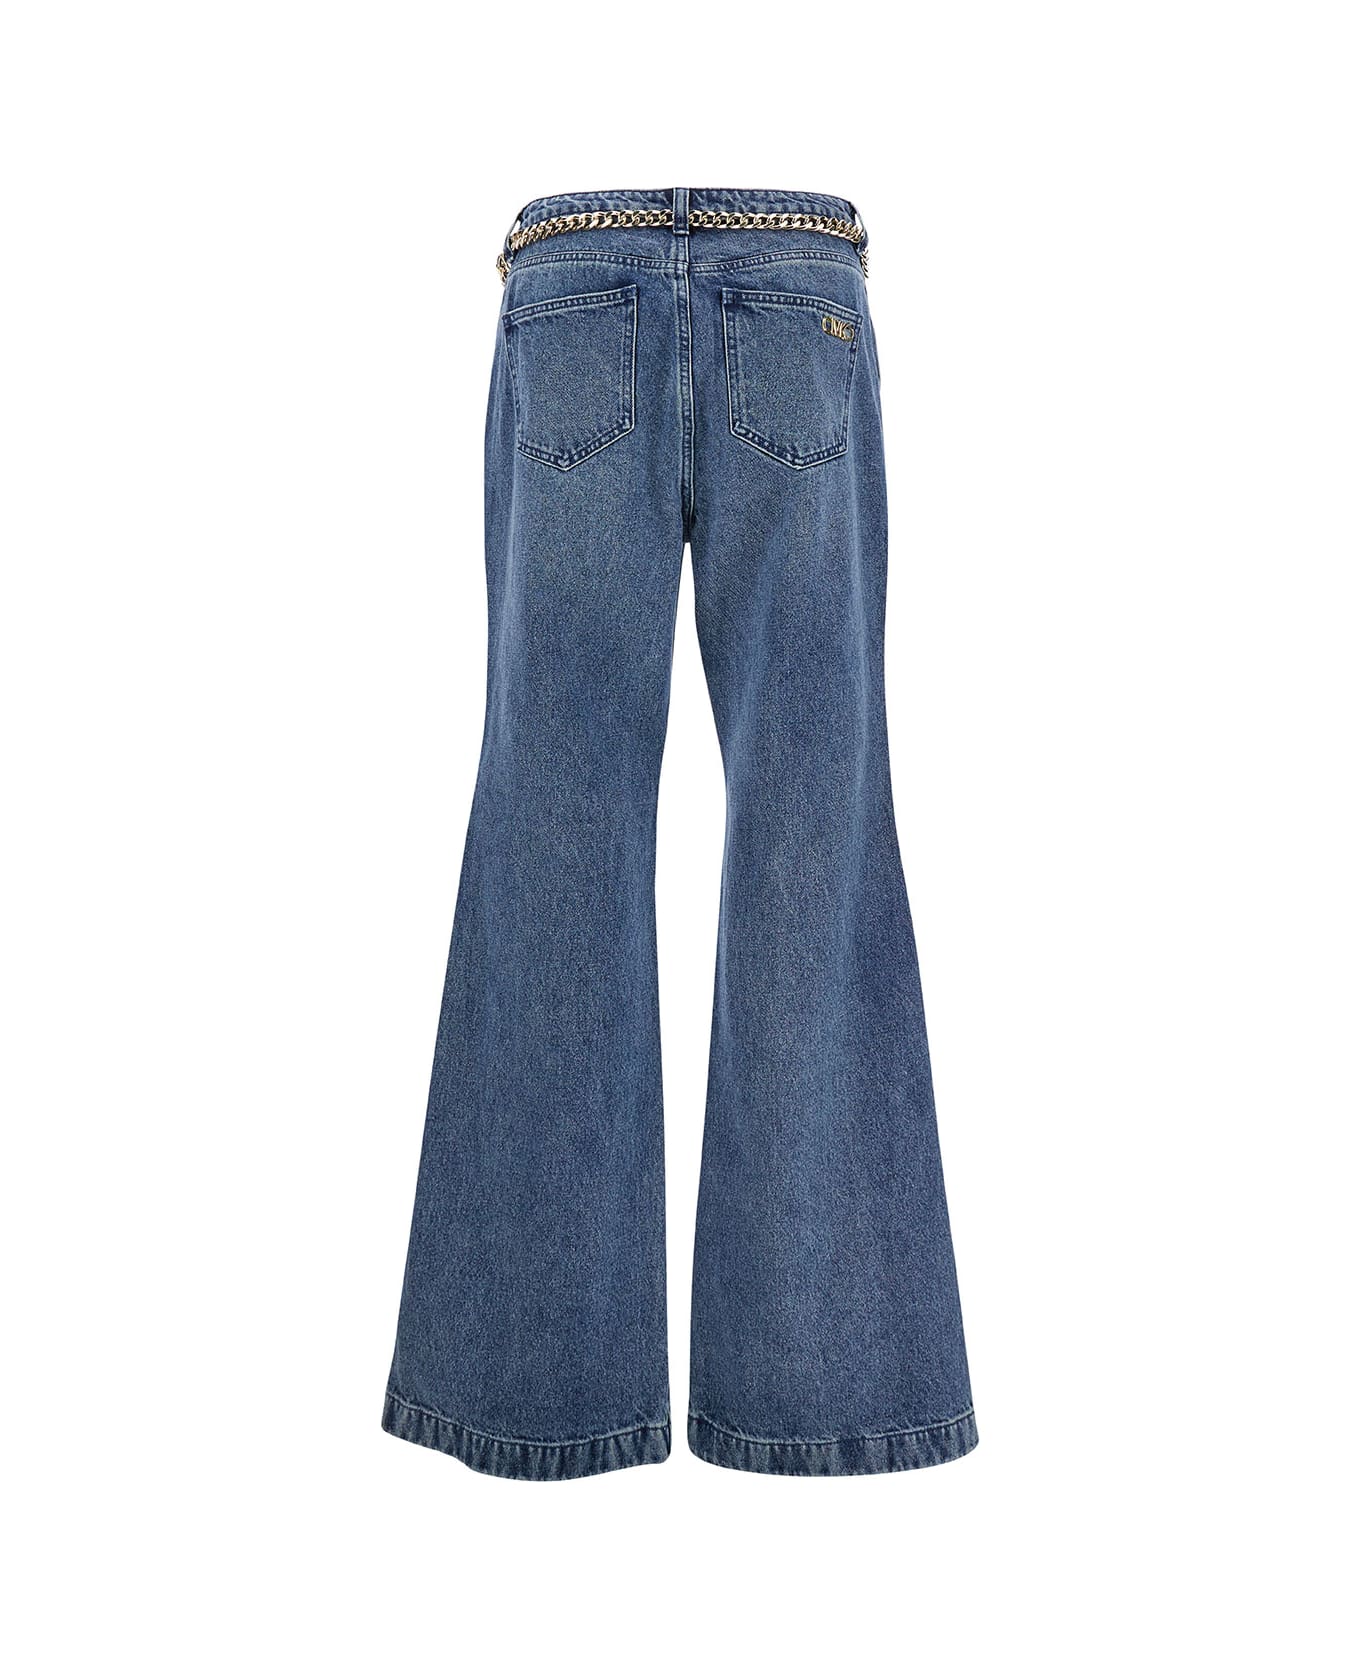 Michael Kors Collection Blue Flared Jeans With Chain Belt In Denim Woman - Duskbluewash